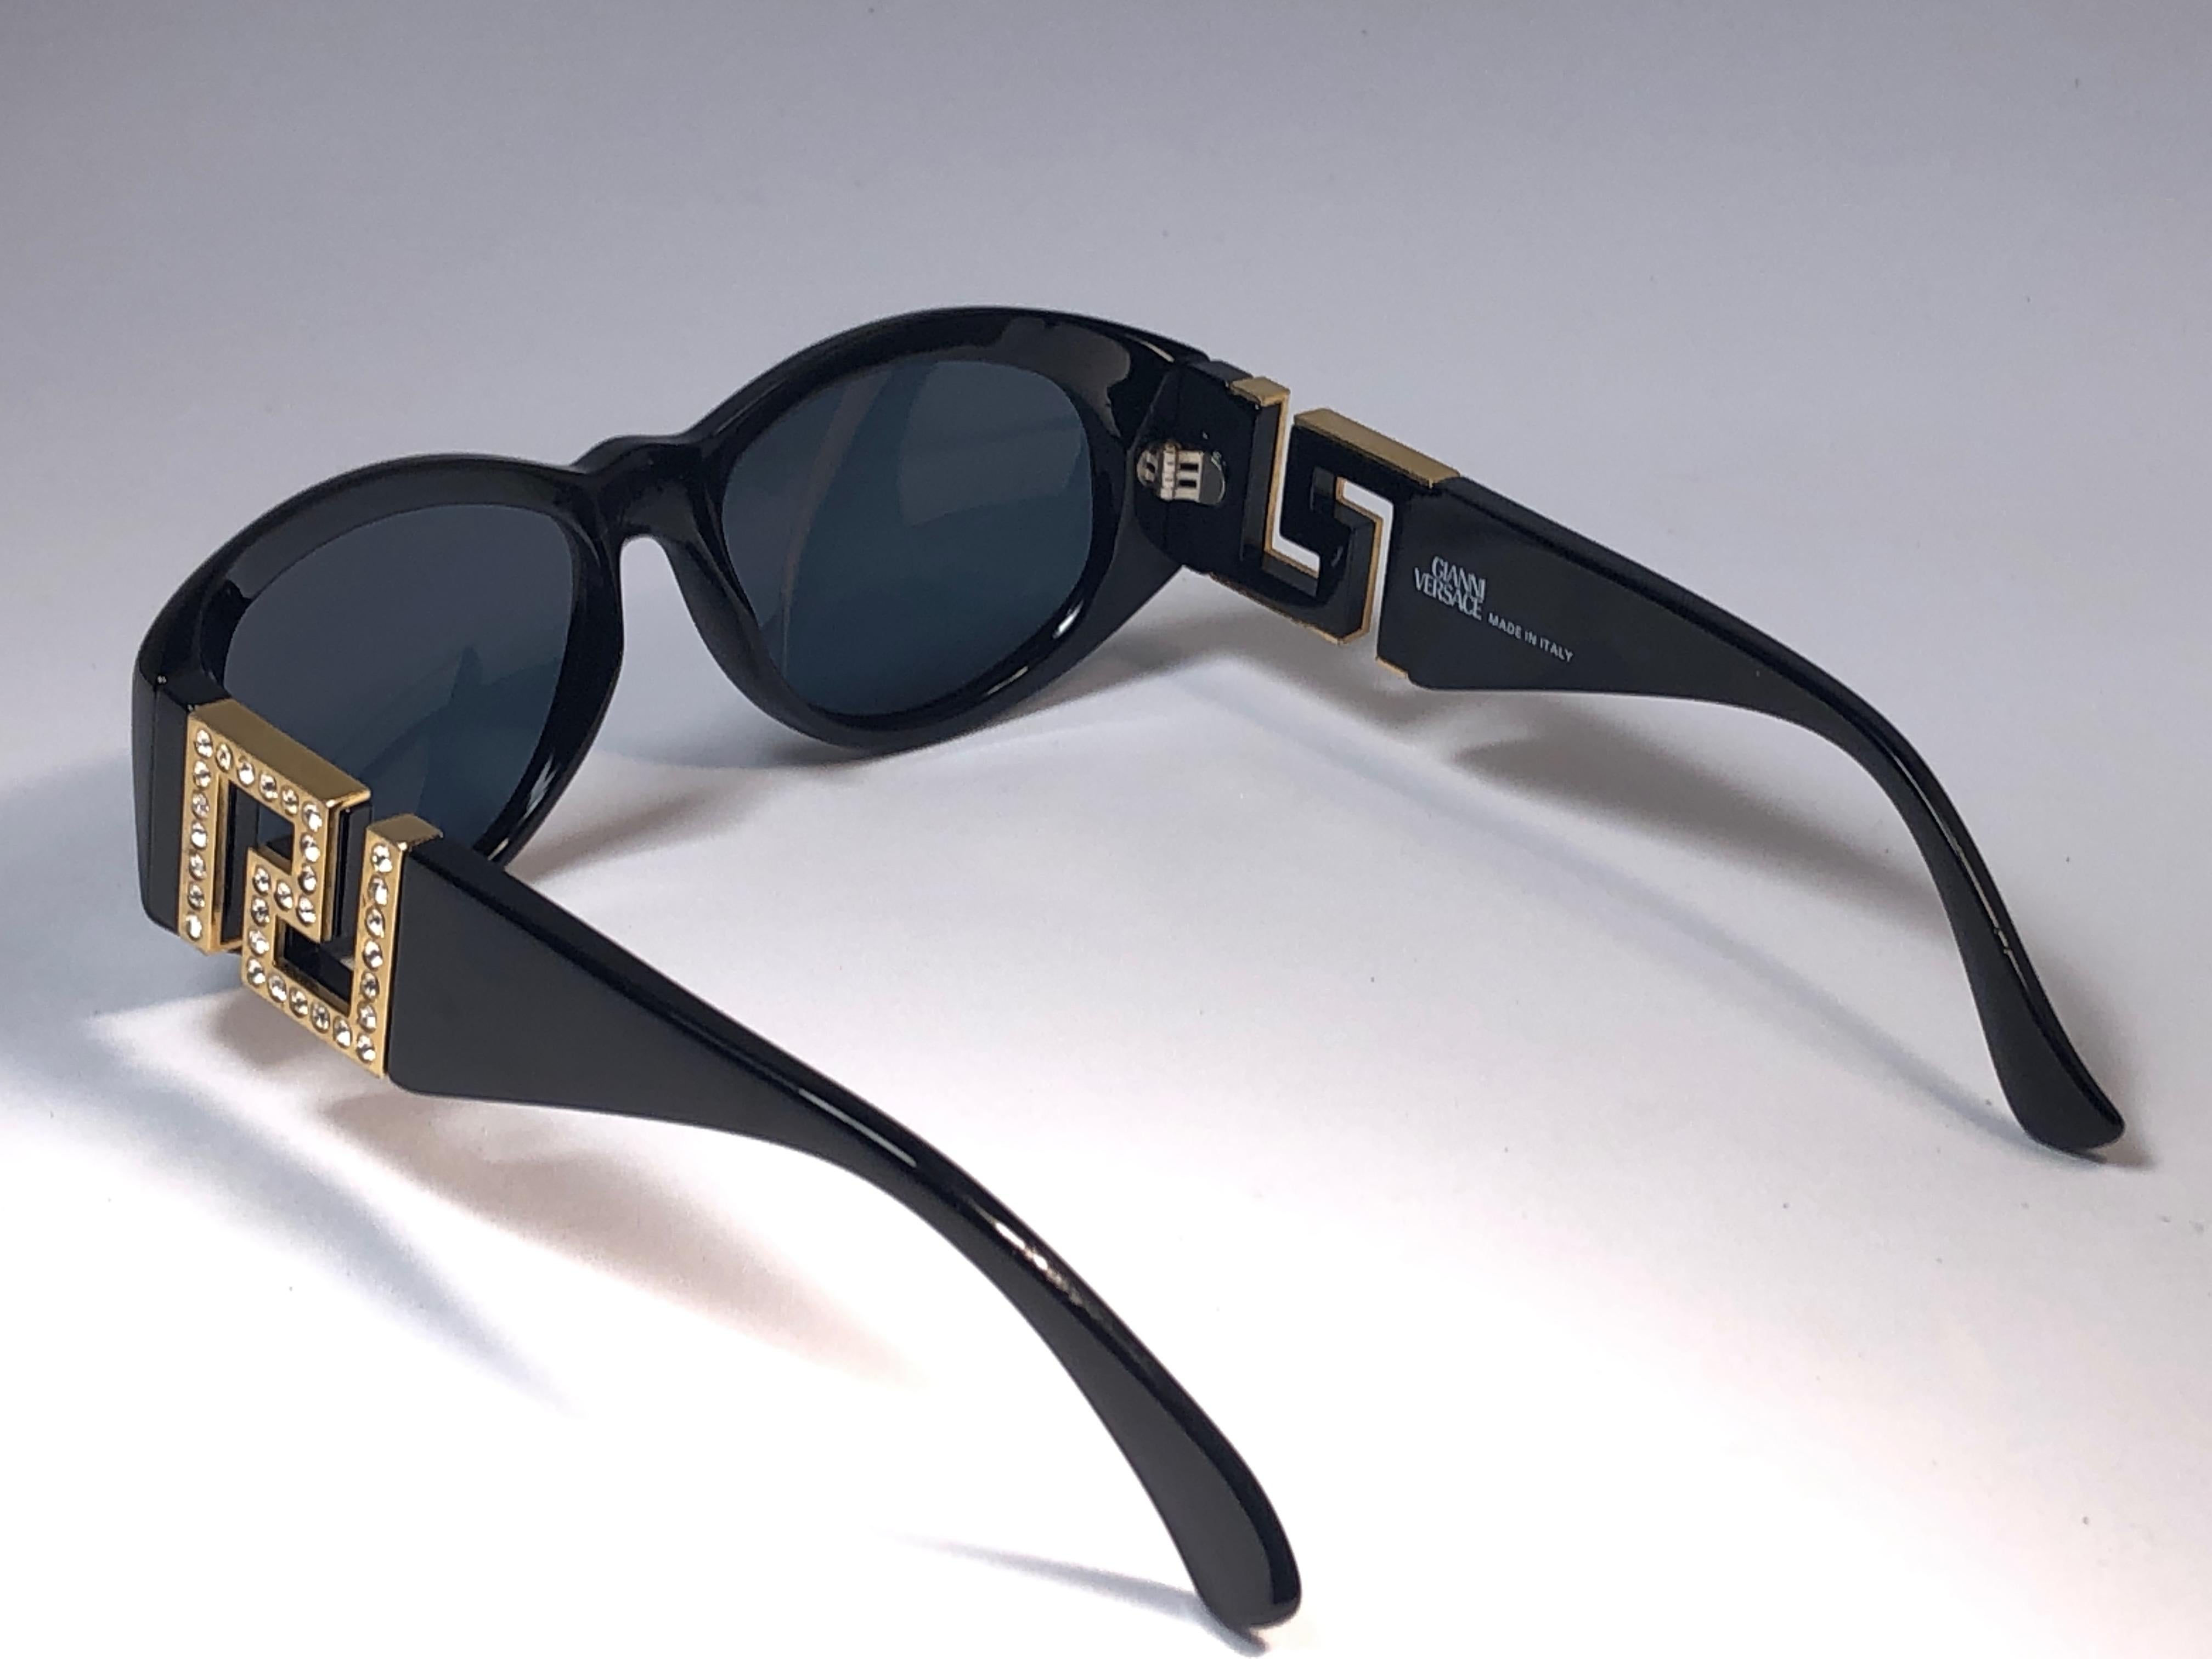 New Vintage Gianni Versace T24 C Sleek Black Sunglasses 1990's Made in Italy 1